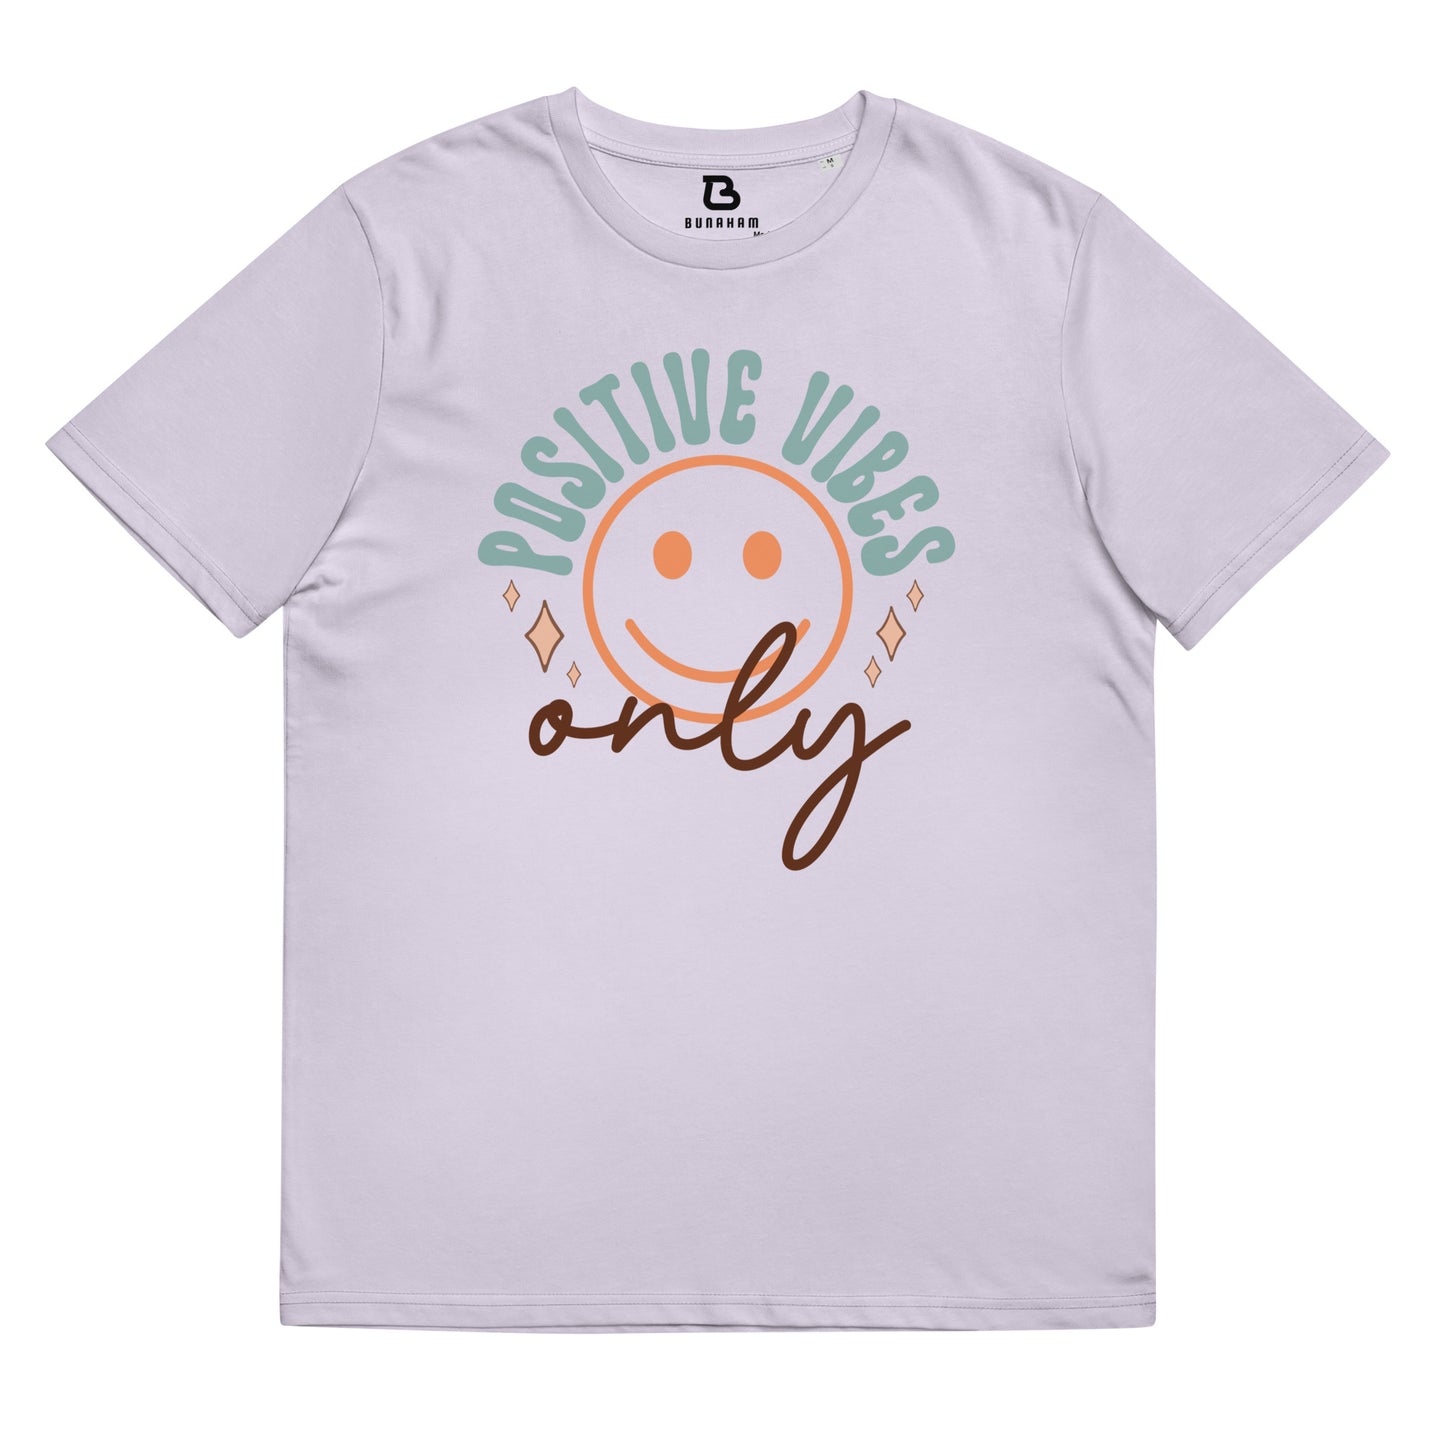 Unisex Organic Cotton T-shirt - Positive Vibes Only